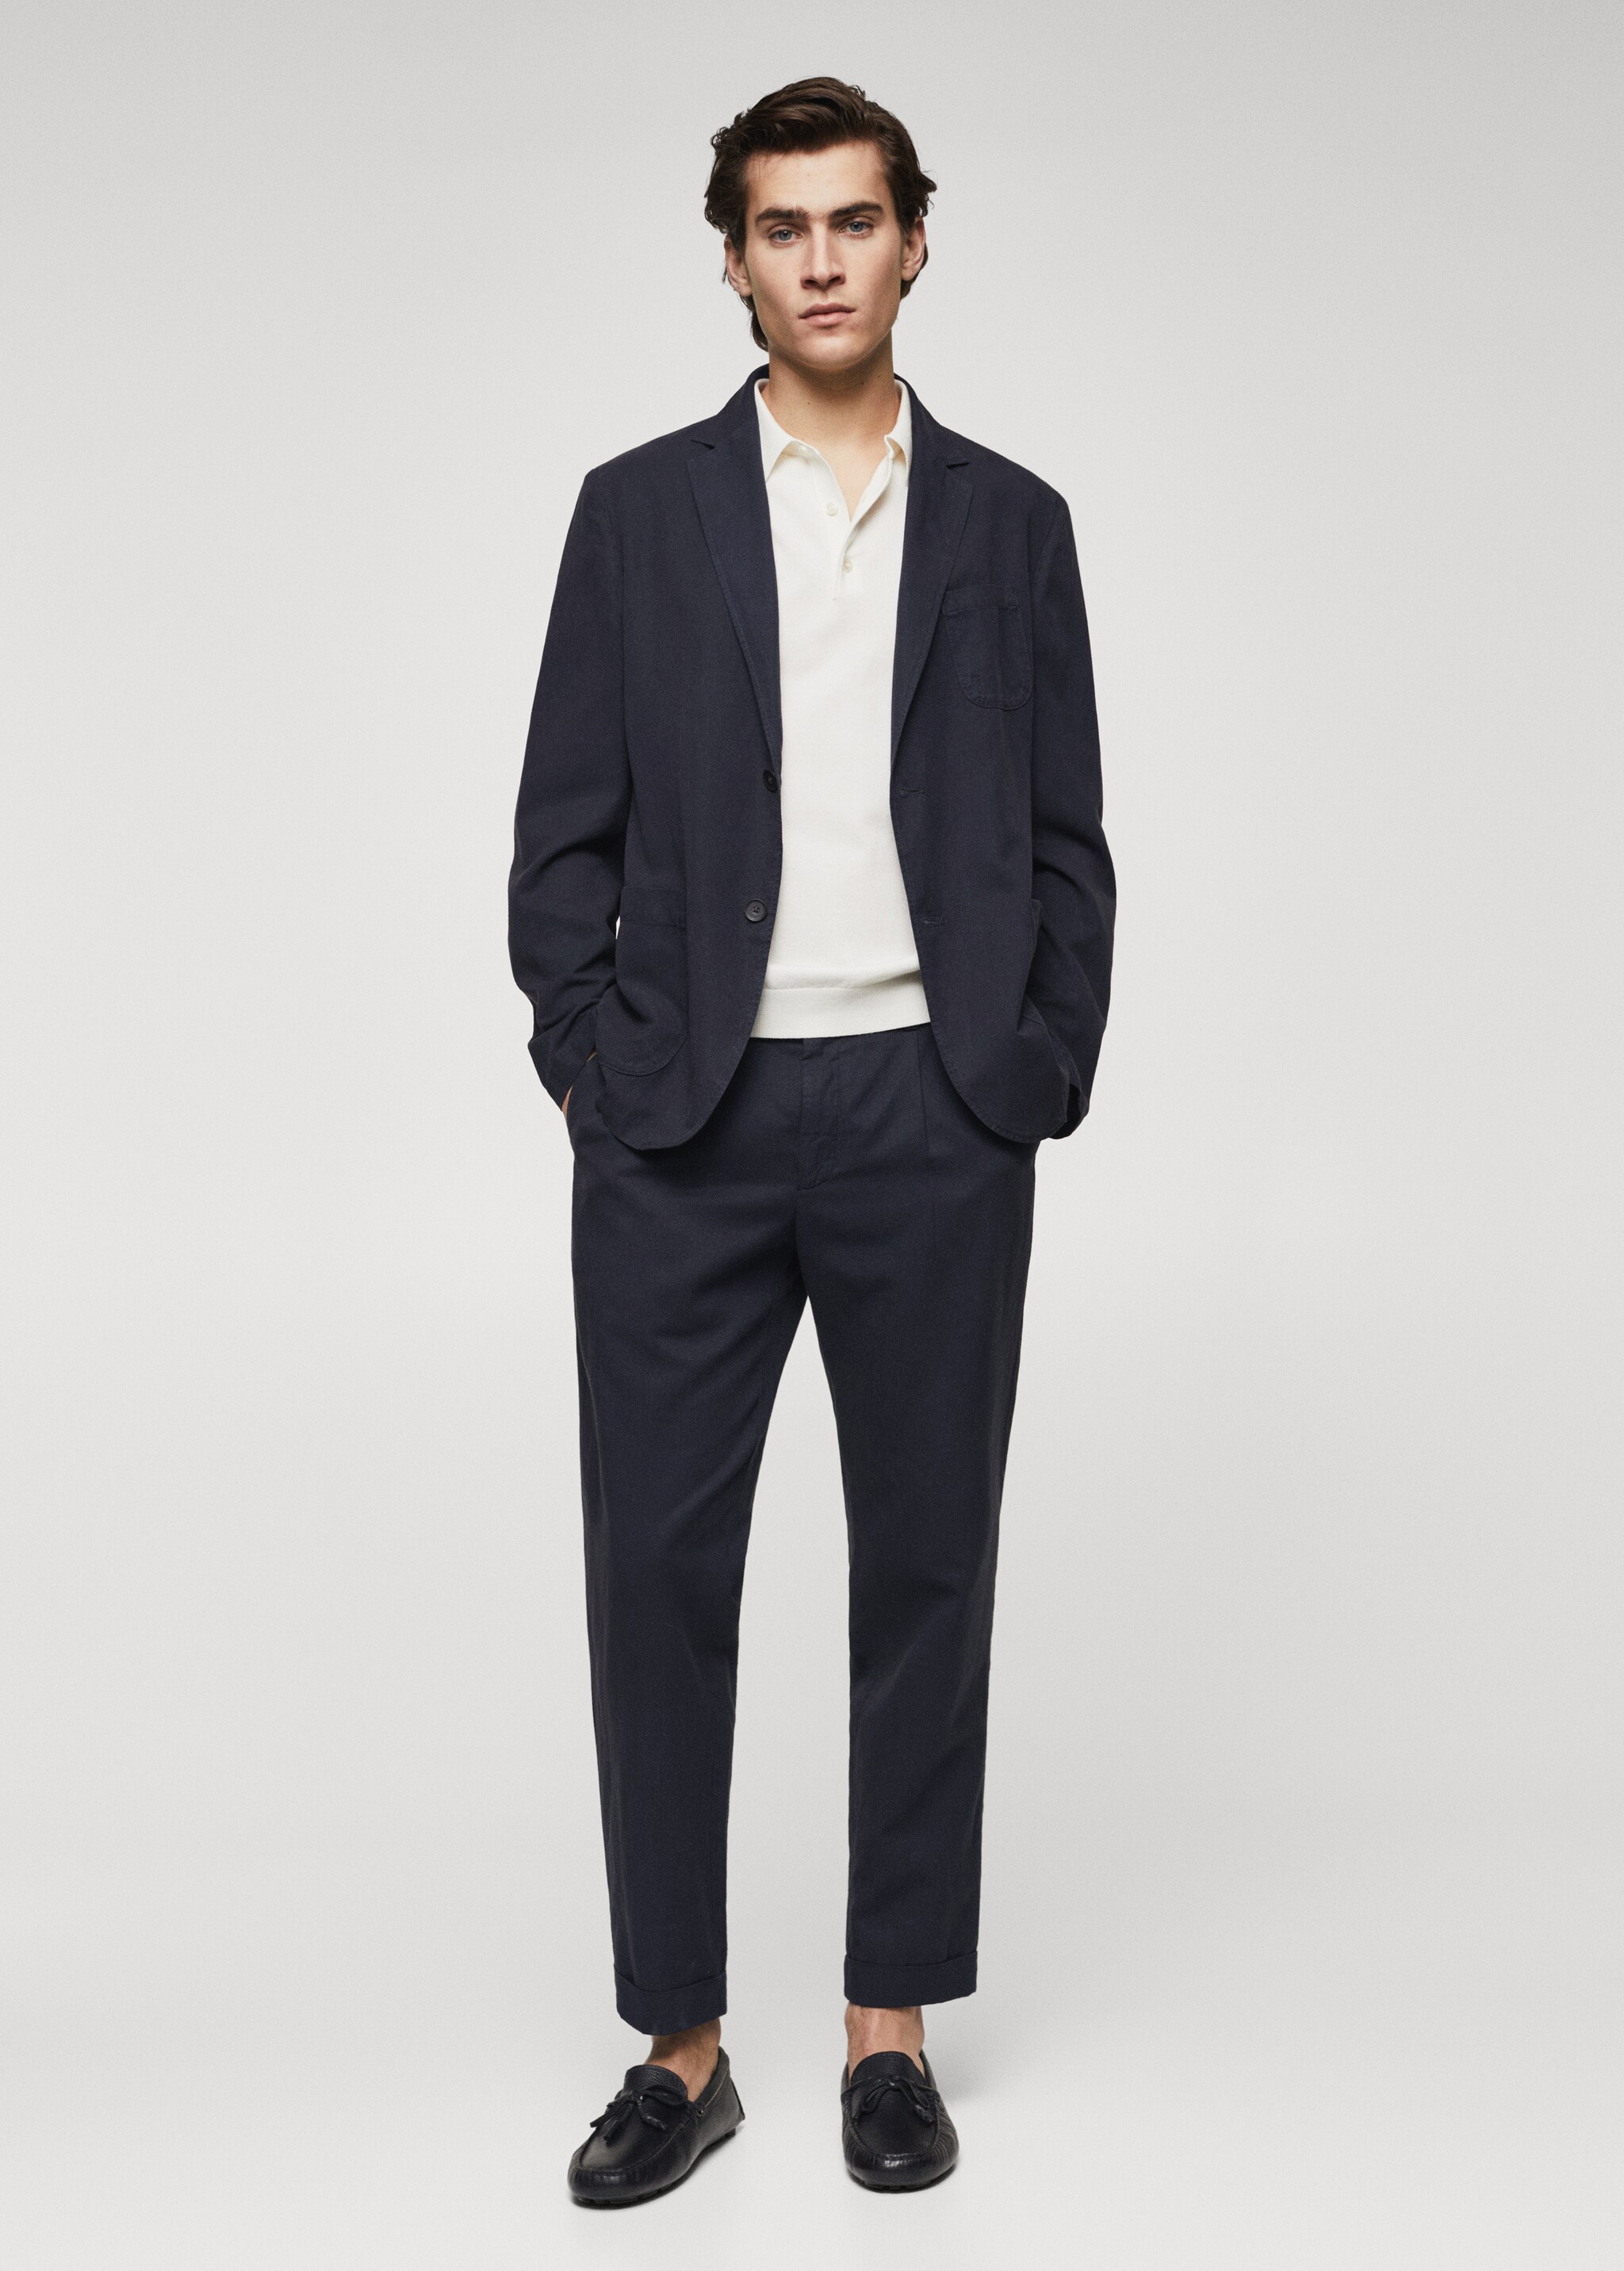 Tapered-fit pleated pants - General plane